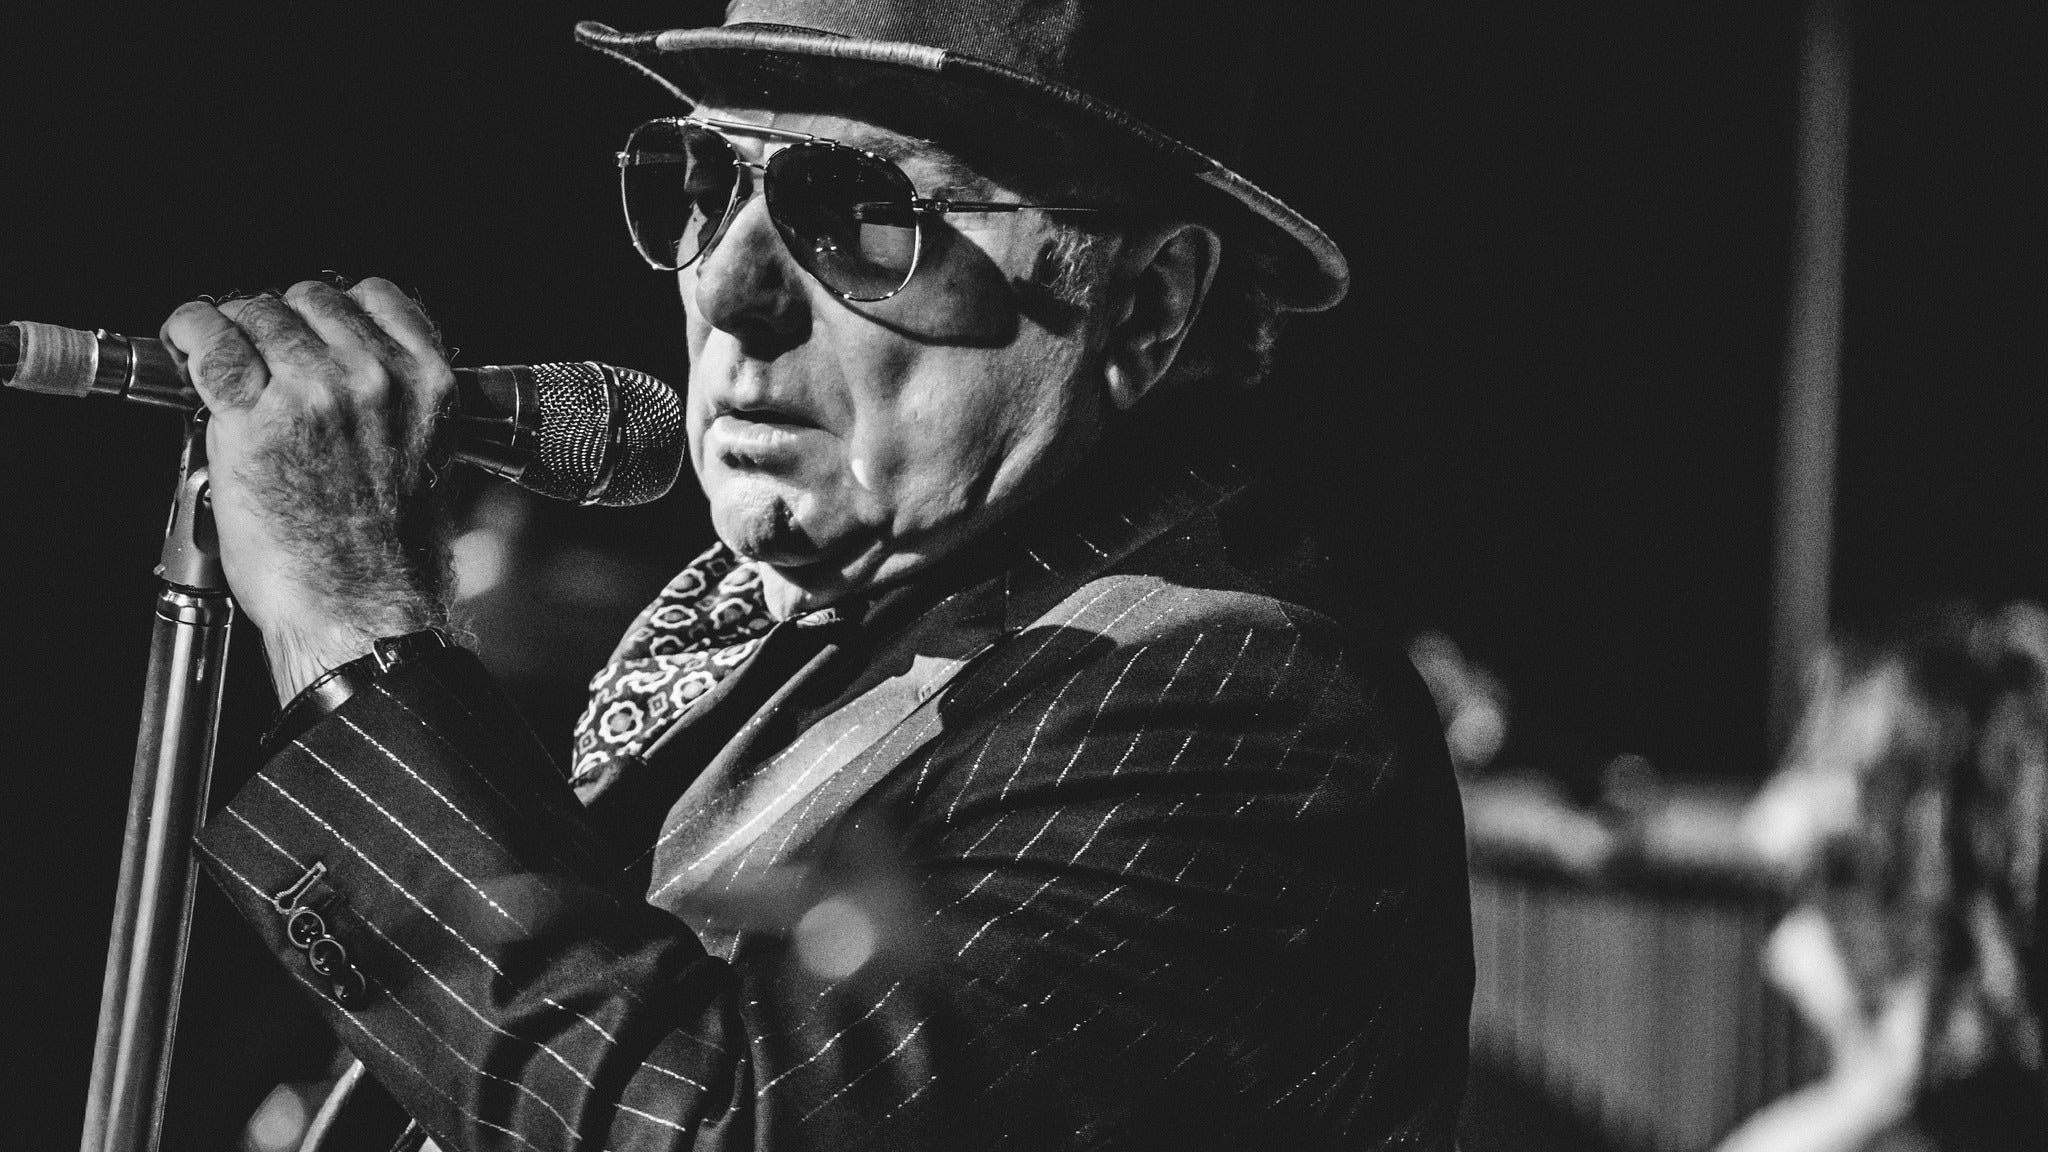 Image used with permission from Ticketmaster | Van Morrison tickets